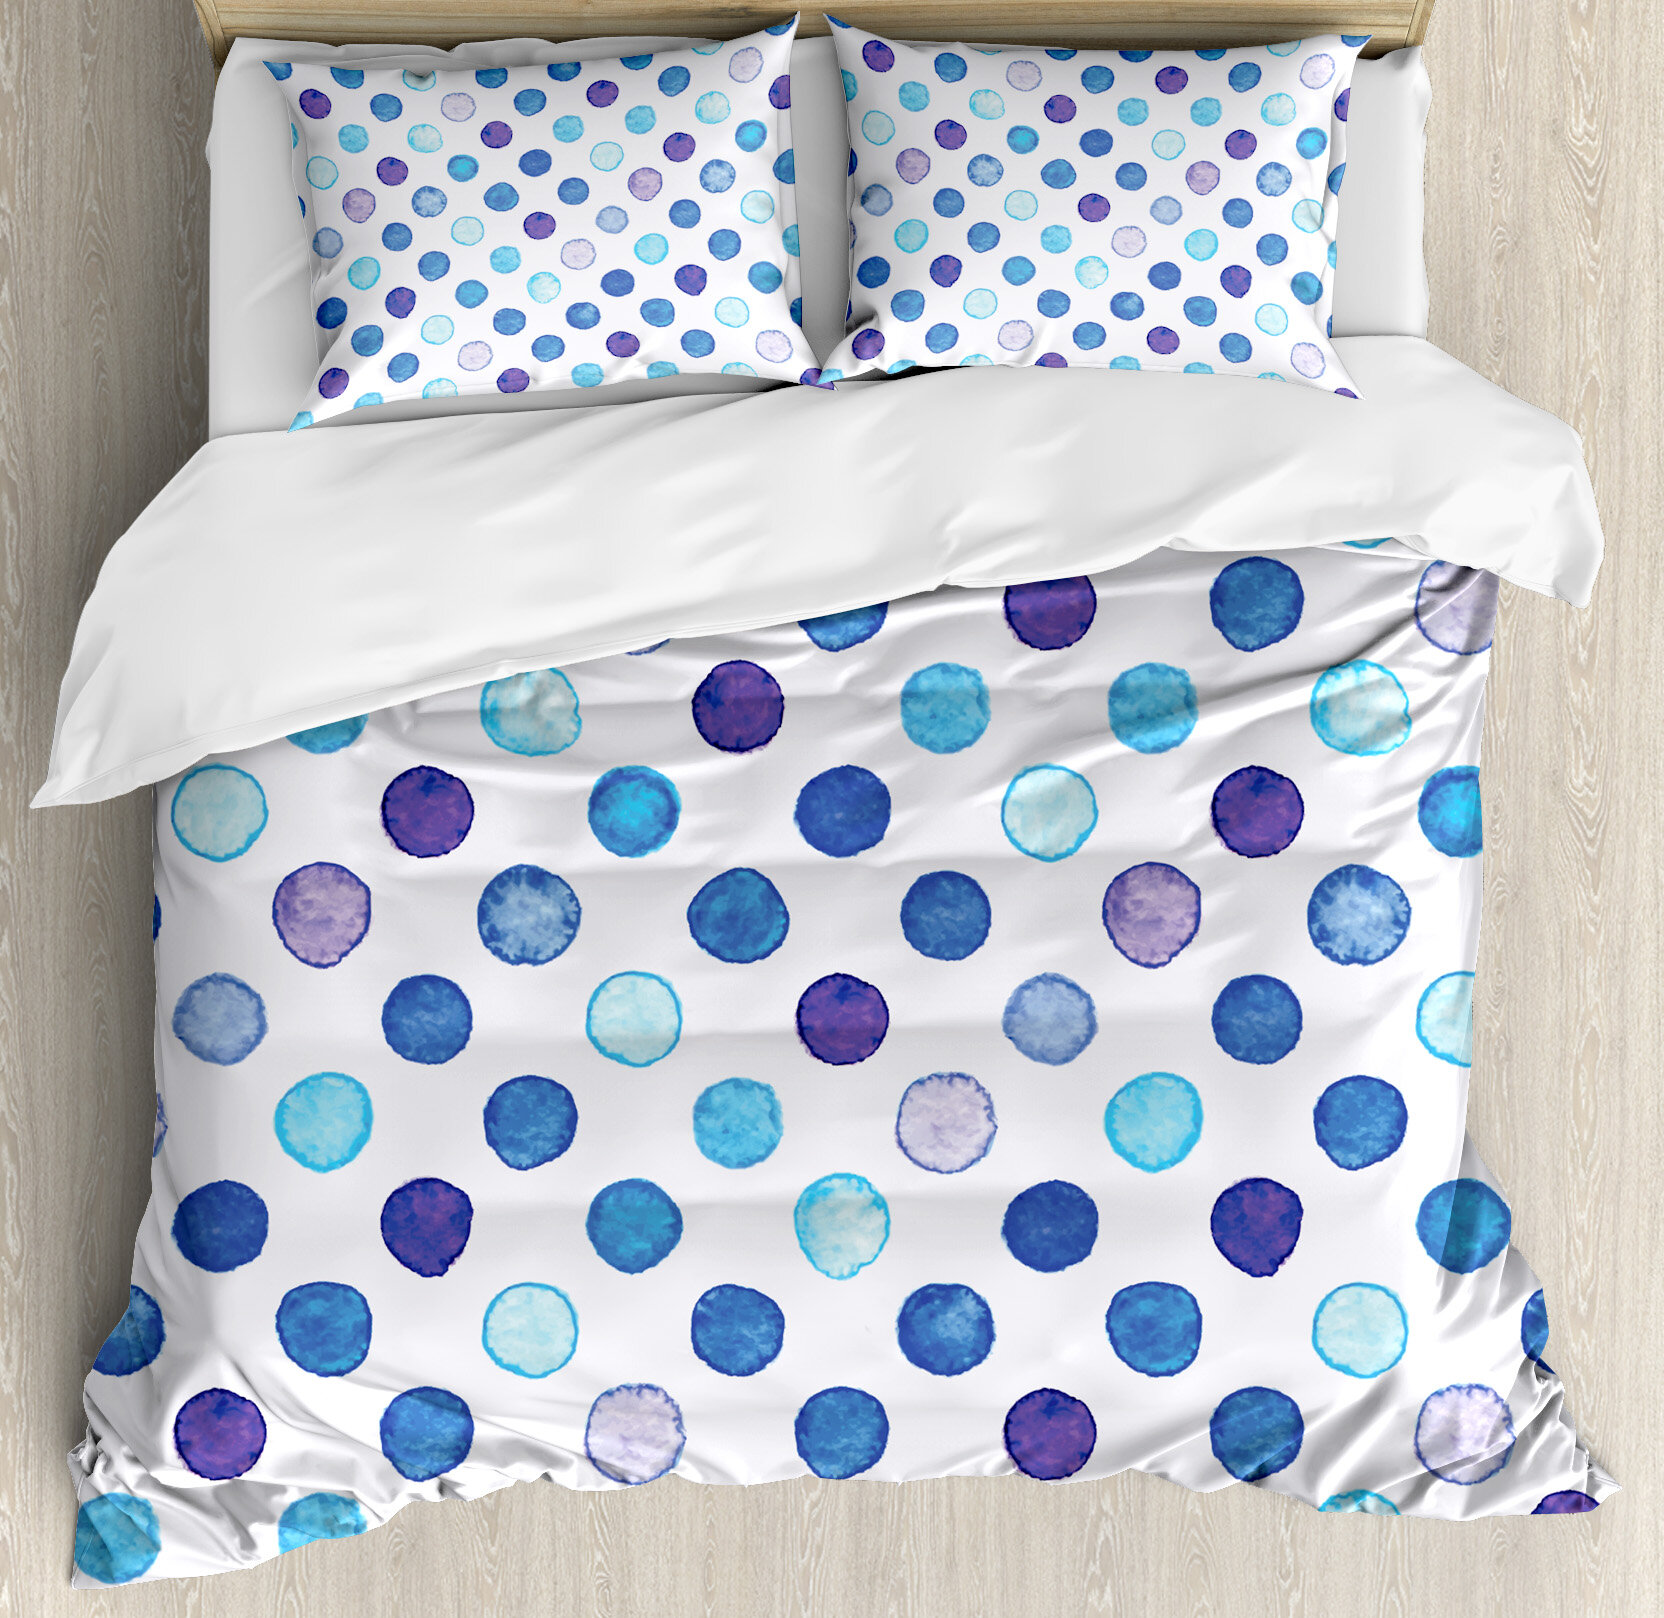 East Urban Home Watercolor Vintage Polka Dots Motif With Different